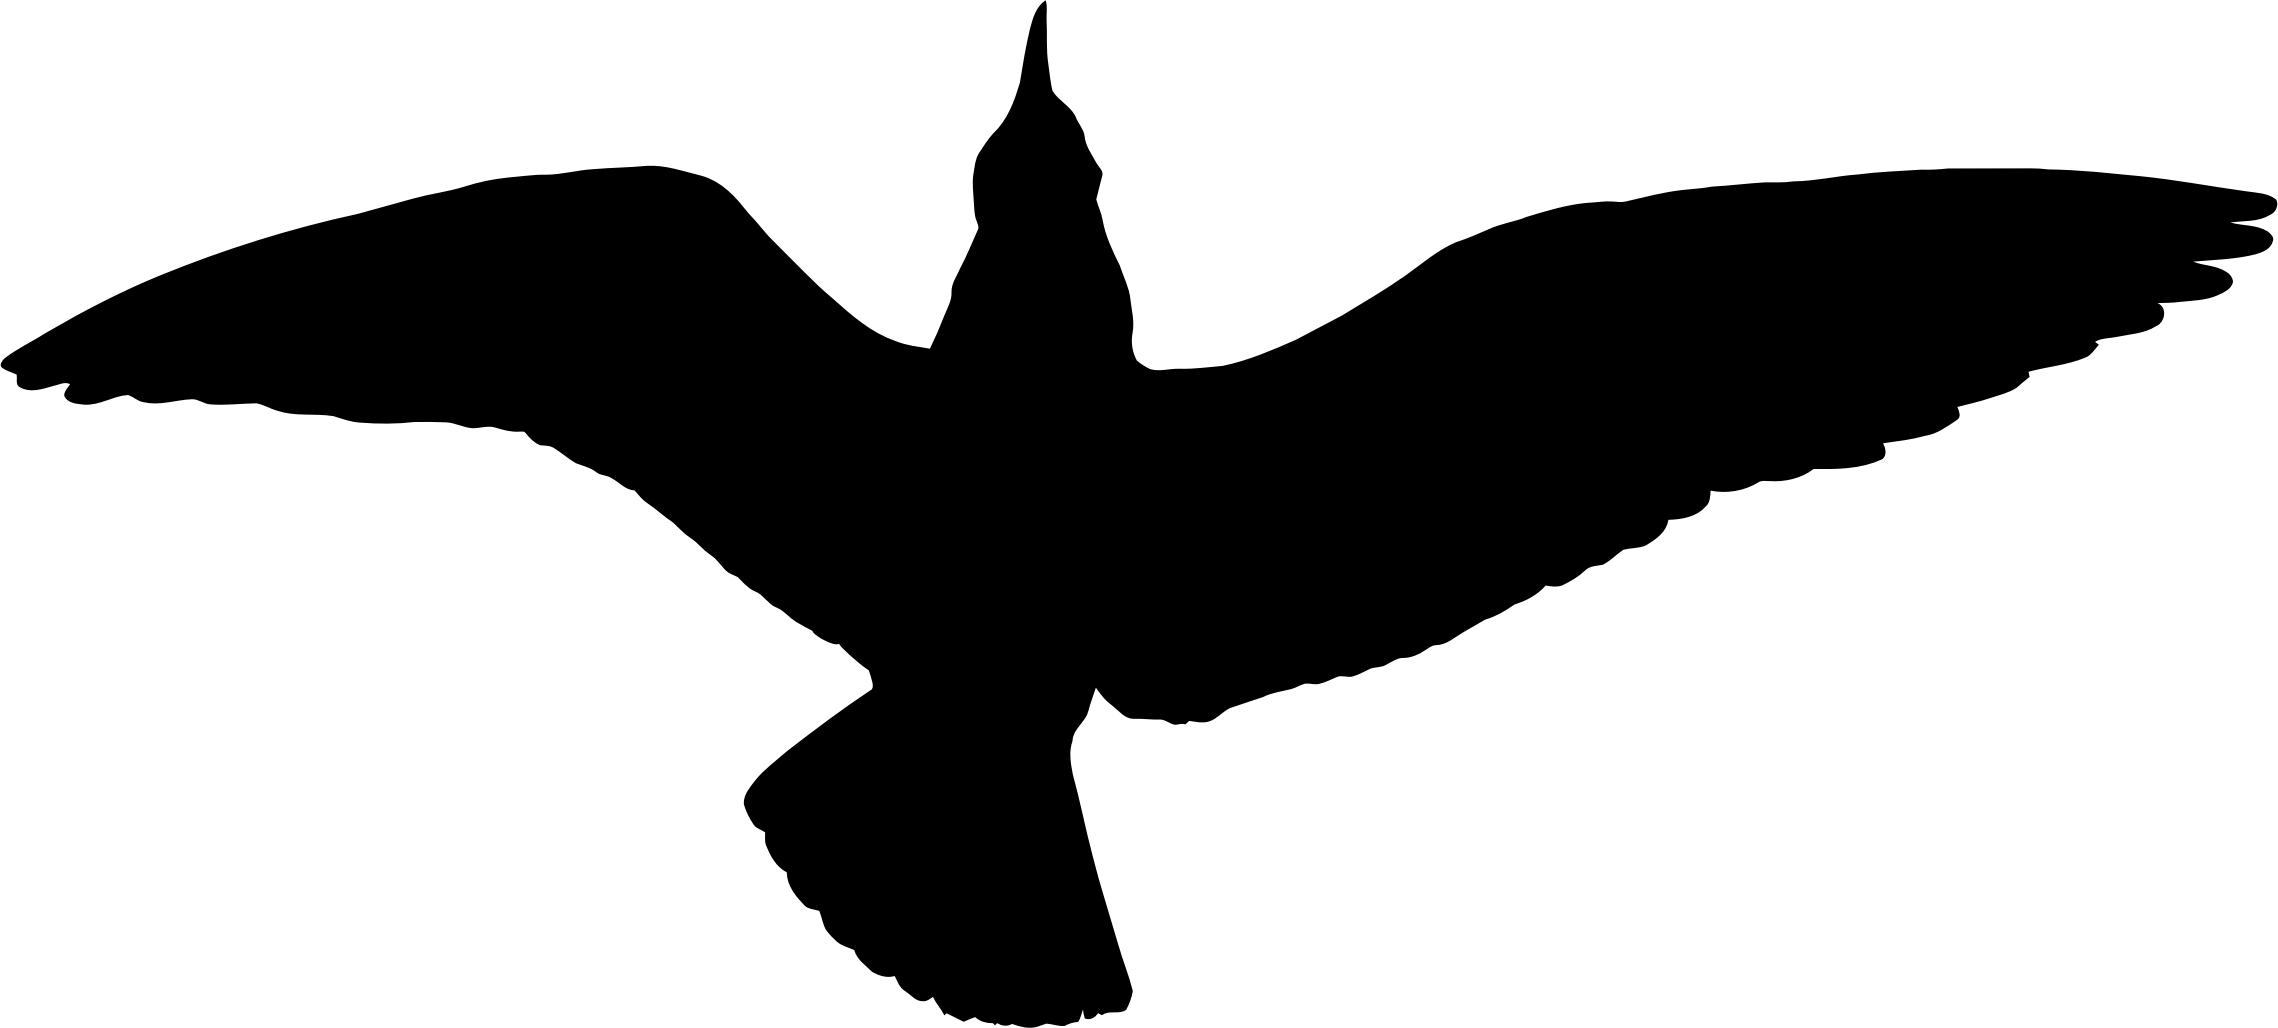 Seagull Silhouette png